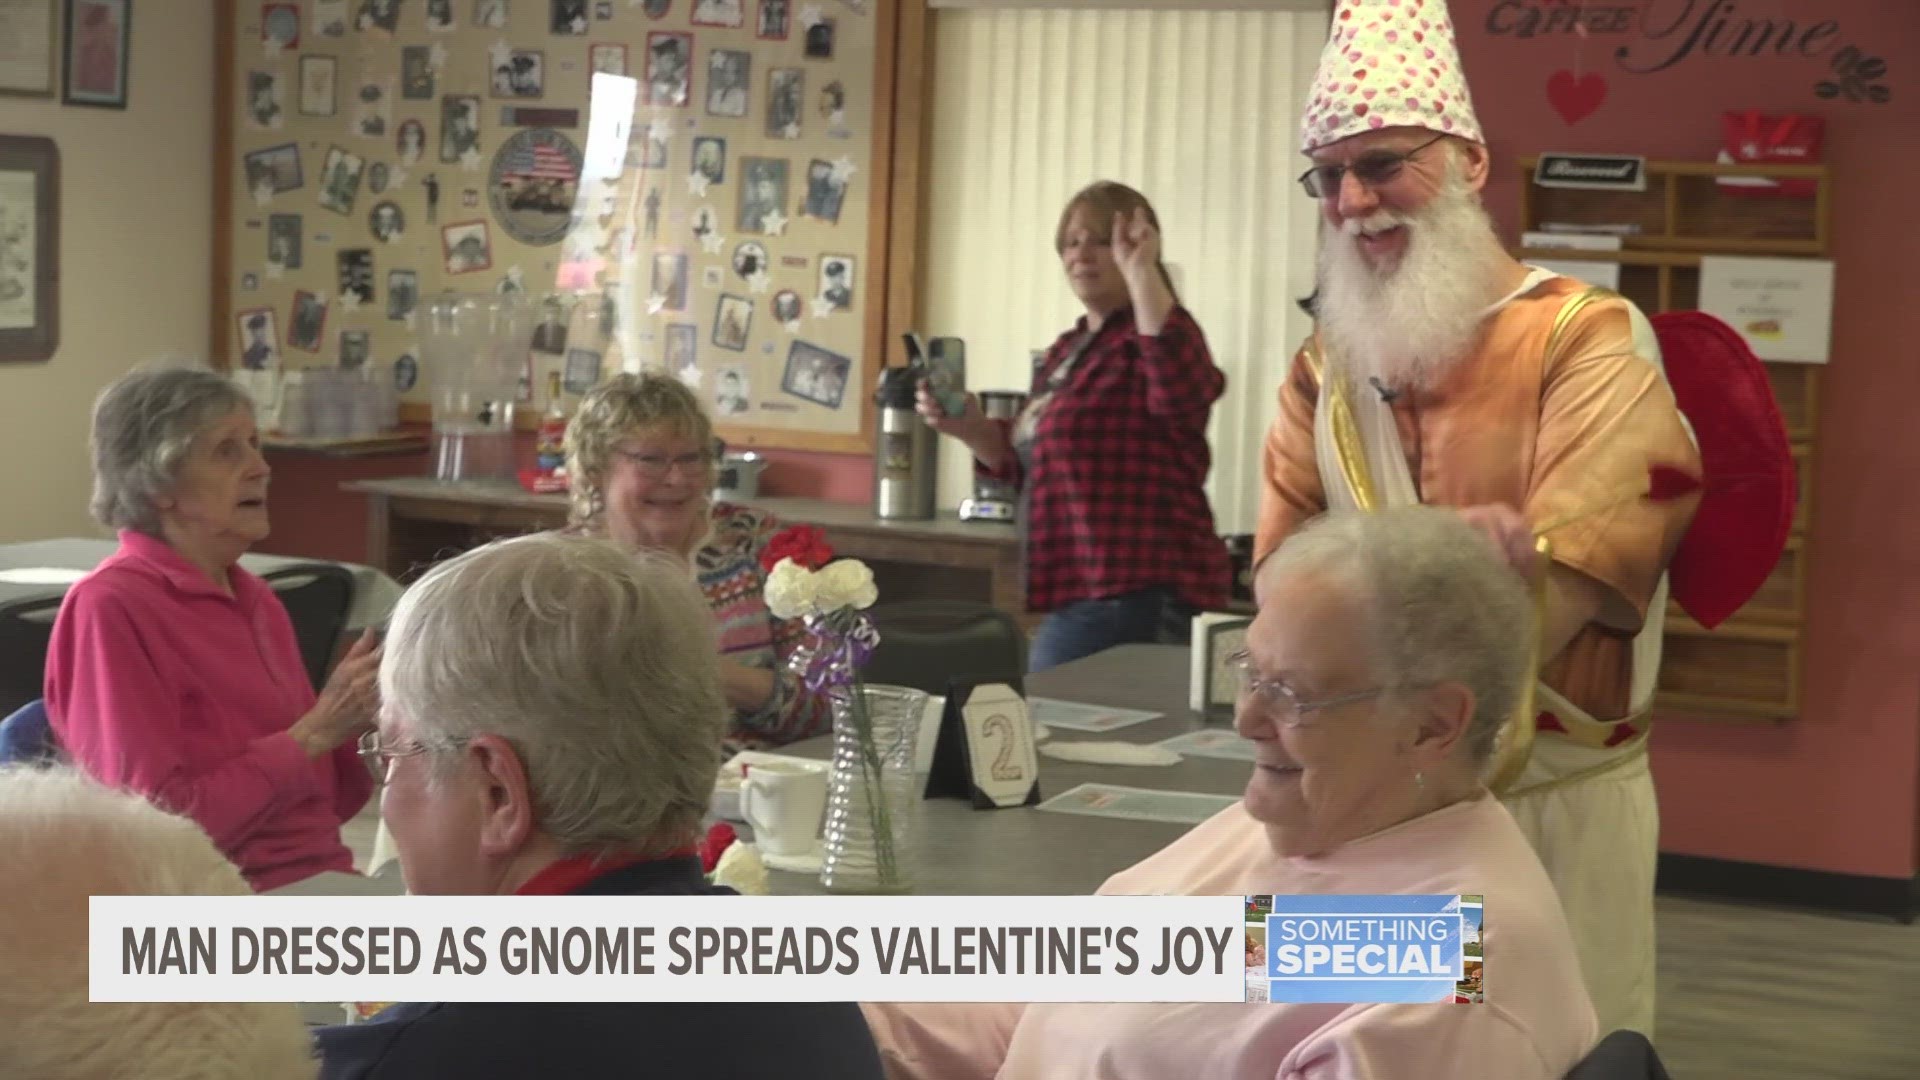 A man in Greenville runs a service to spread joy all year long.